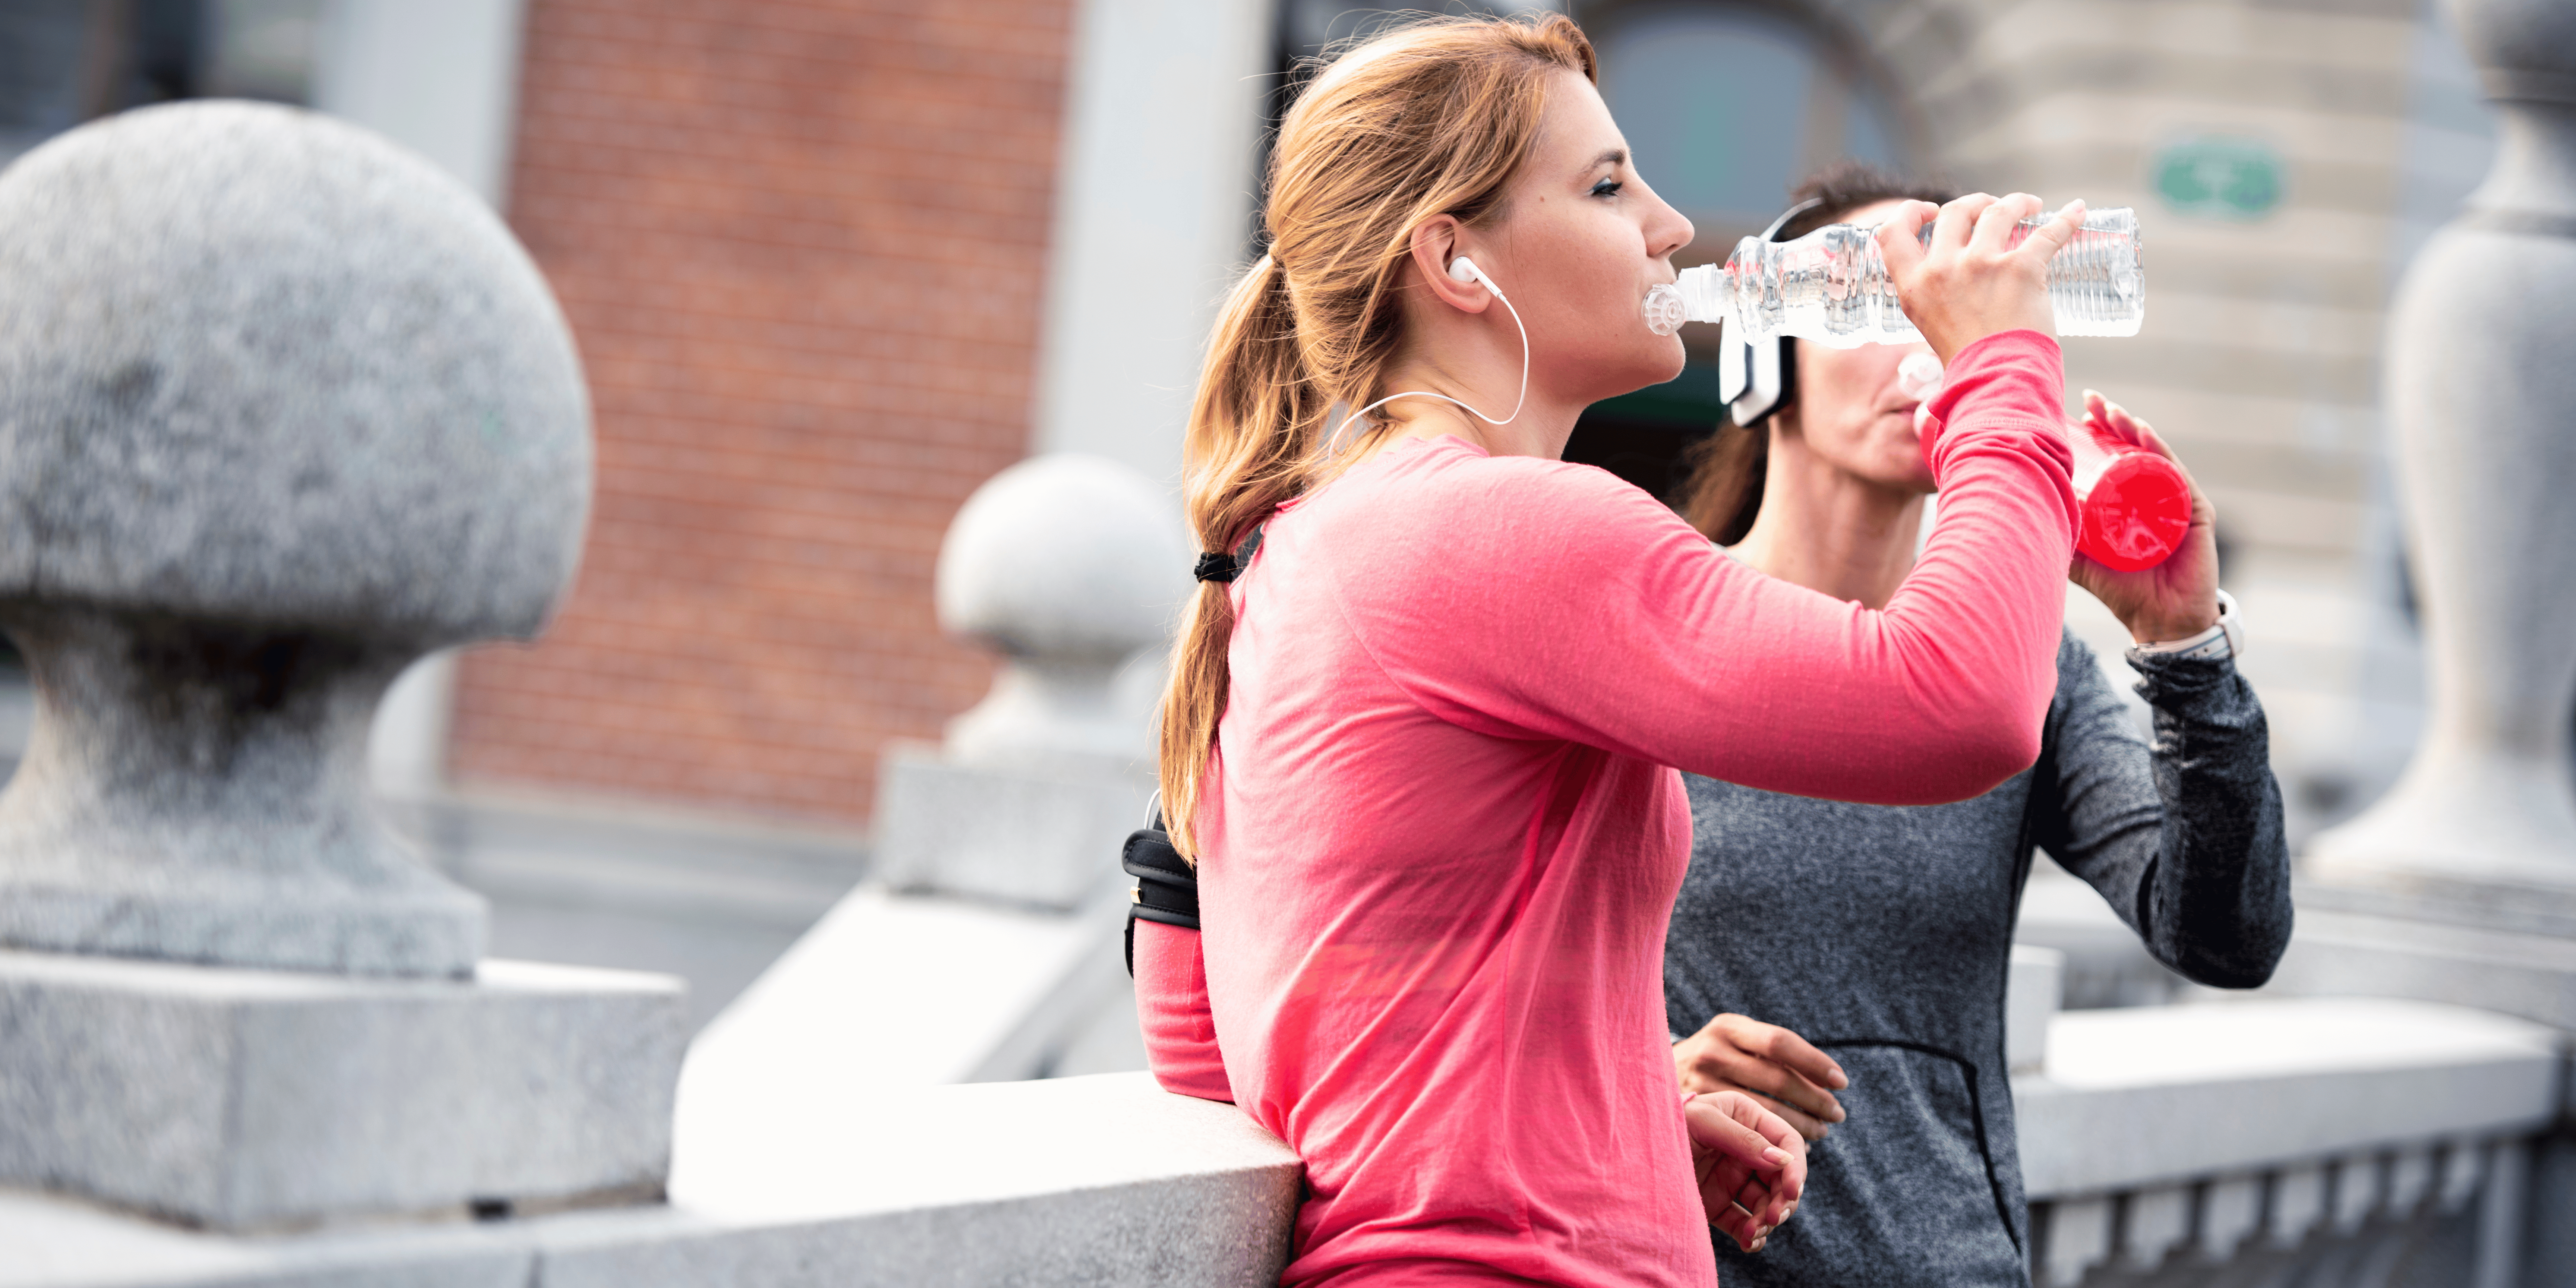 The Importance of Hydration: How to Stay Properly Hydrated